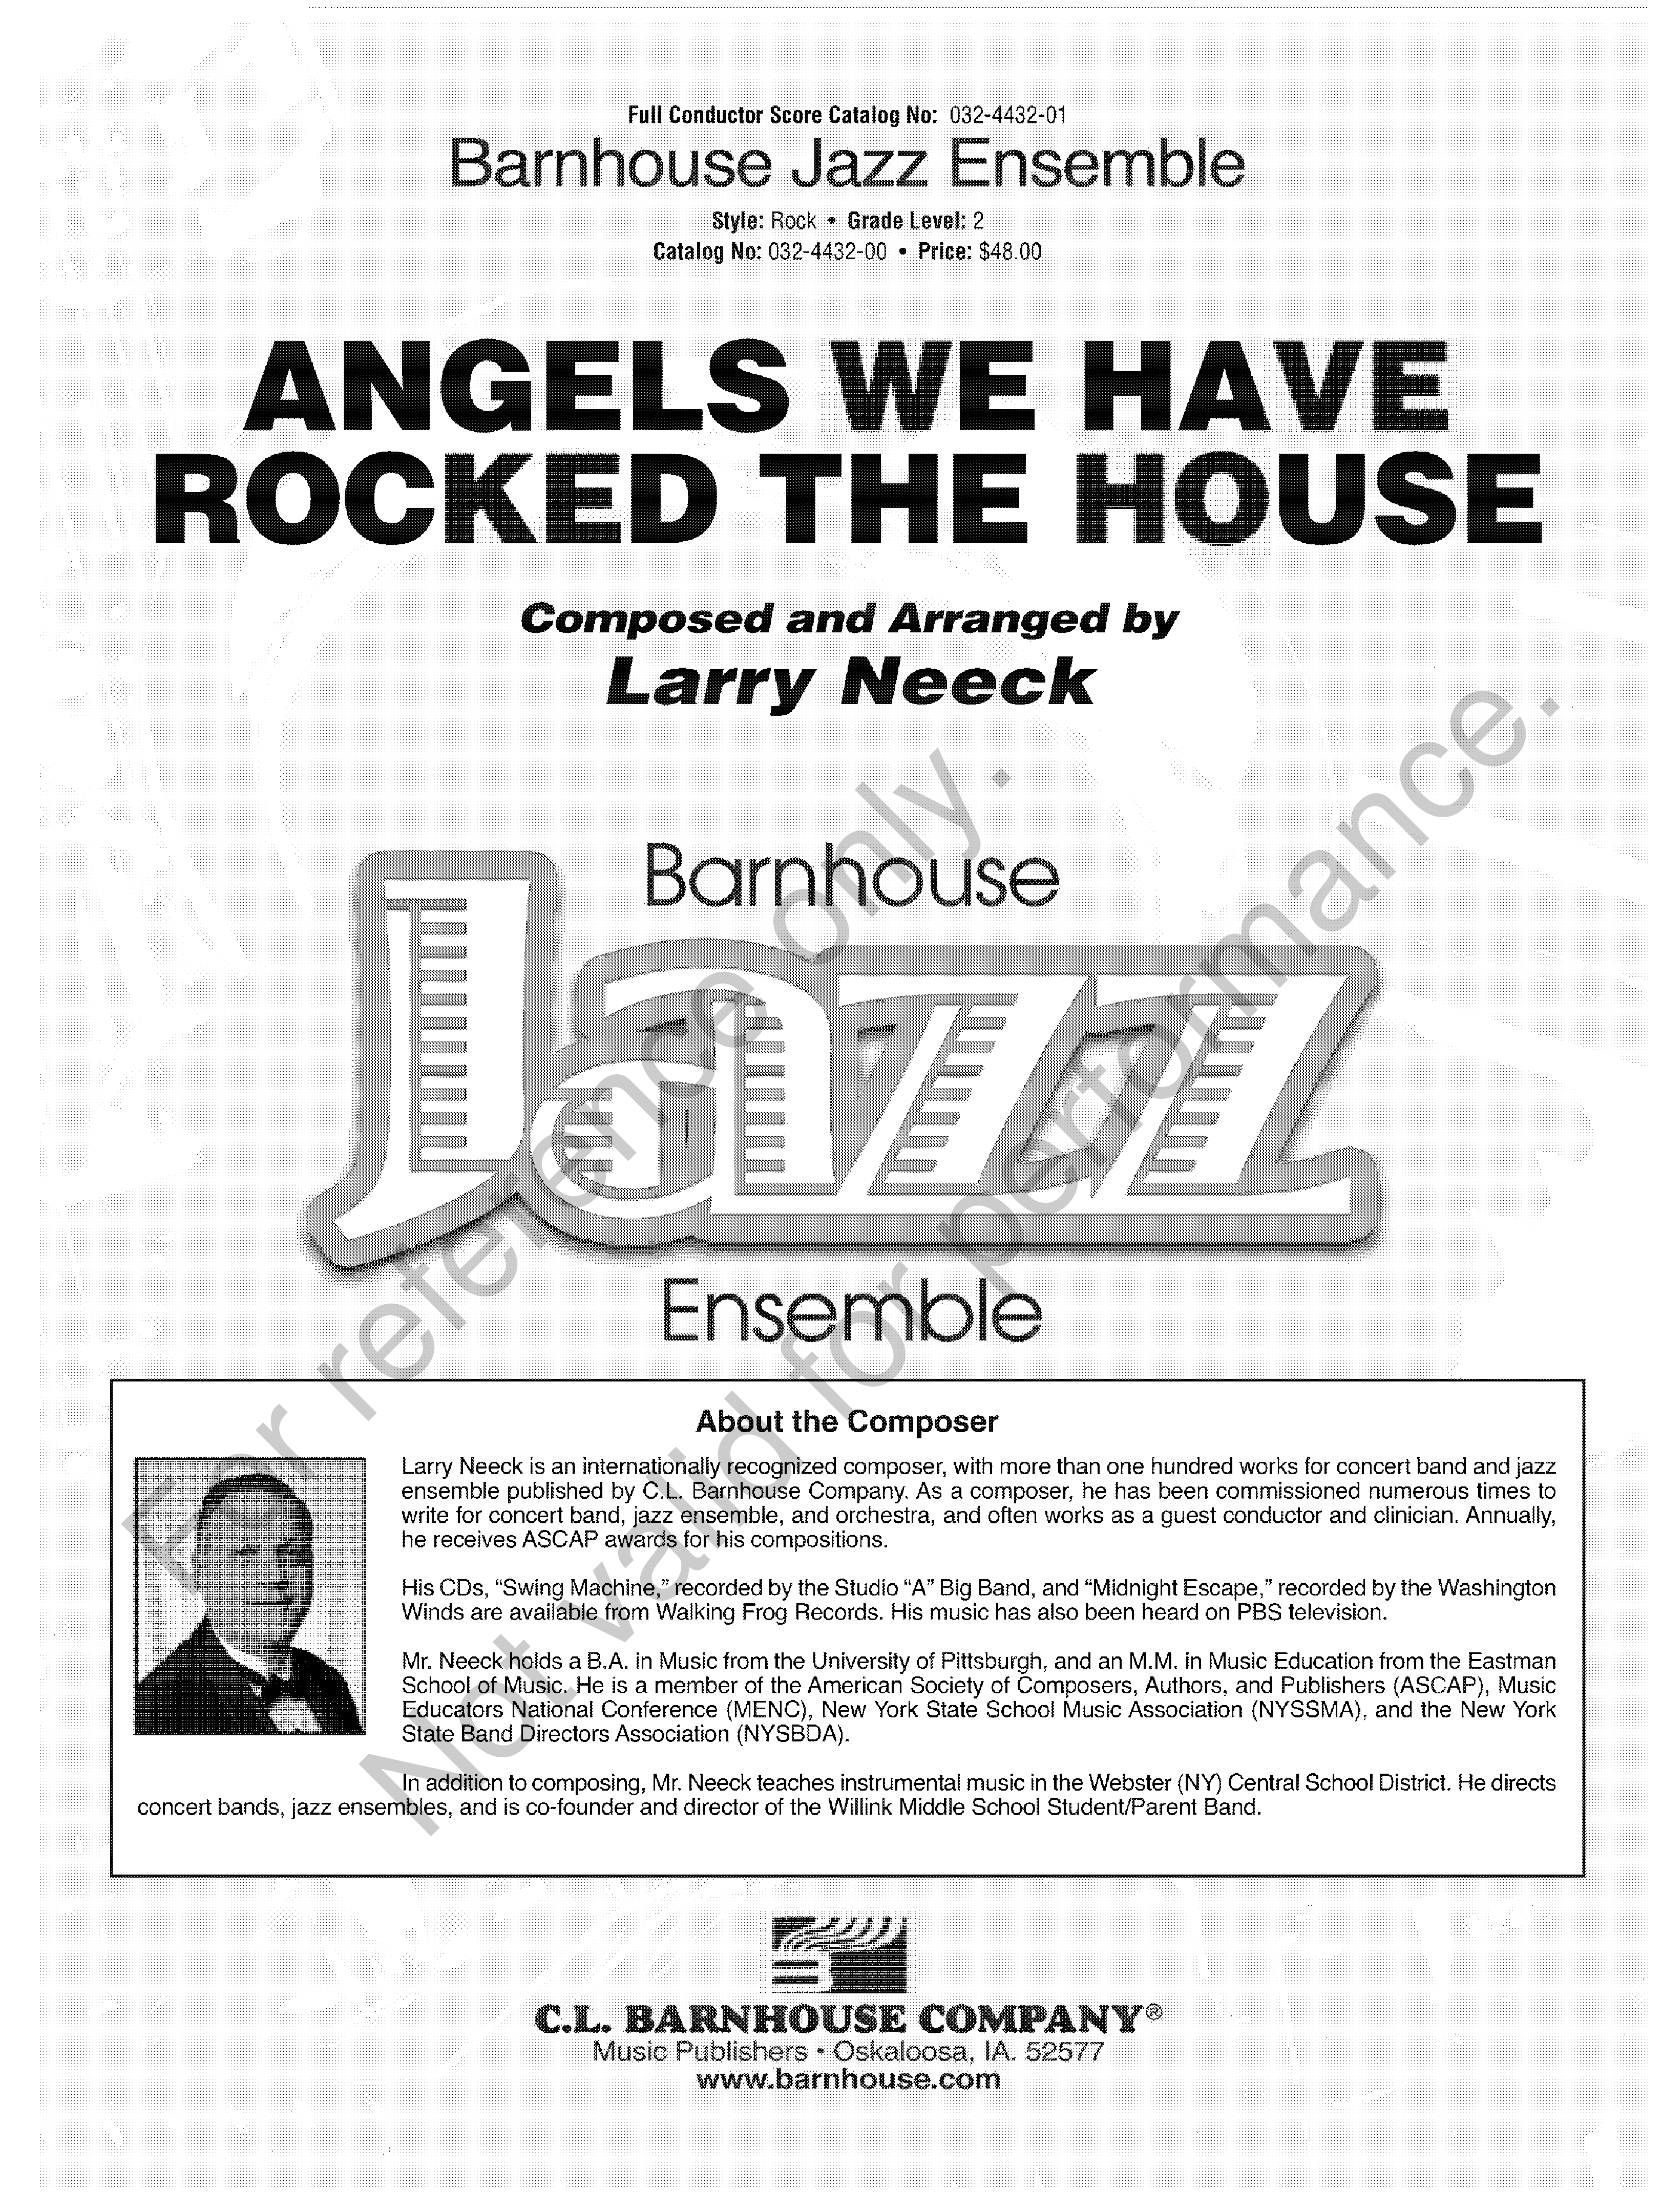 Angels We Have Rocked the House